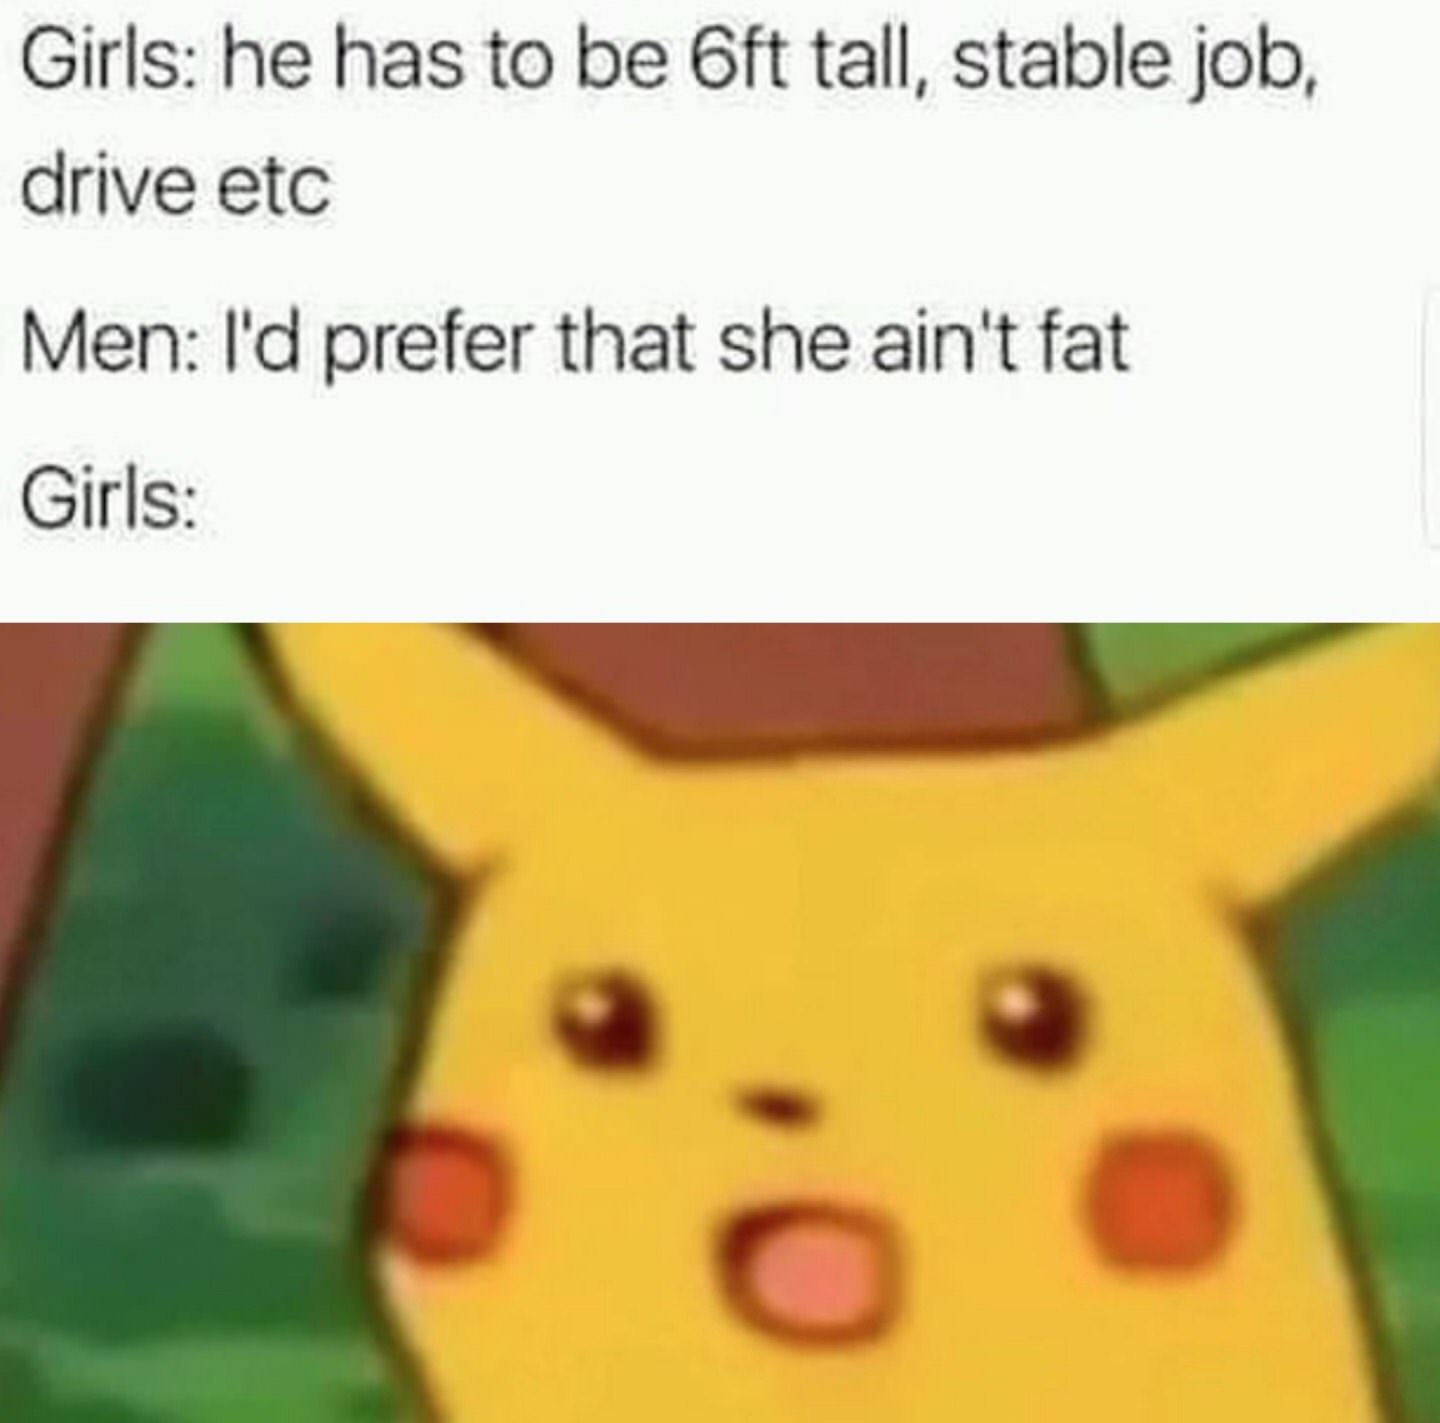 wait that's illegal meme - Girls he has to be oft tall, stable job, drive etc Men I'd prefer that she ain't fat Girls